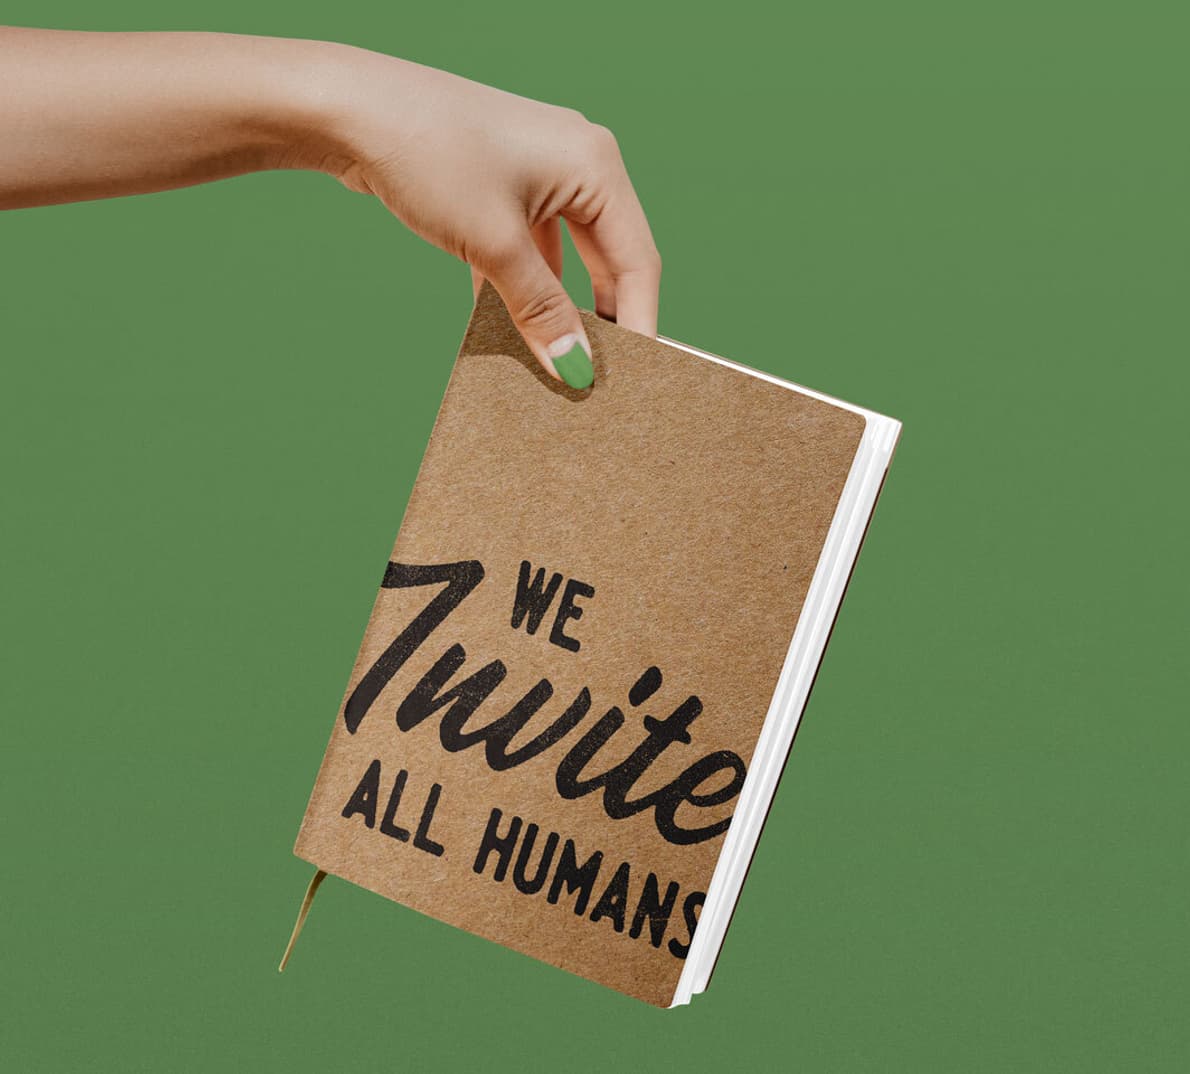 A hand holding a notebook that has a graphic that reads "We Invite All Humans"